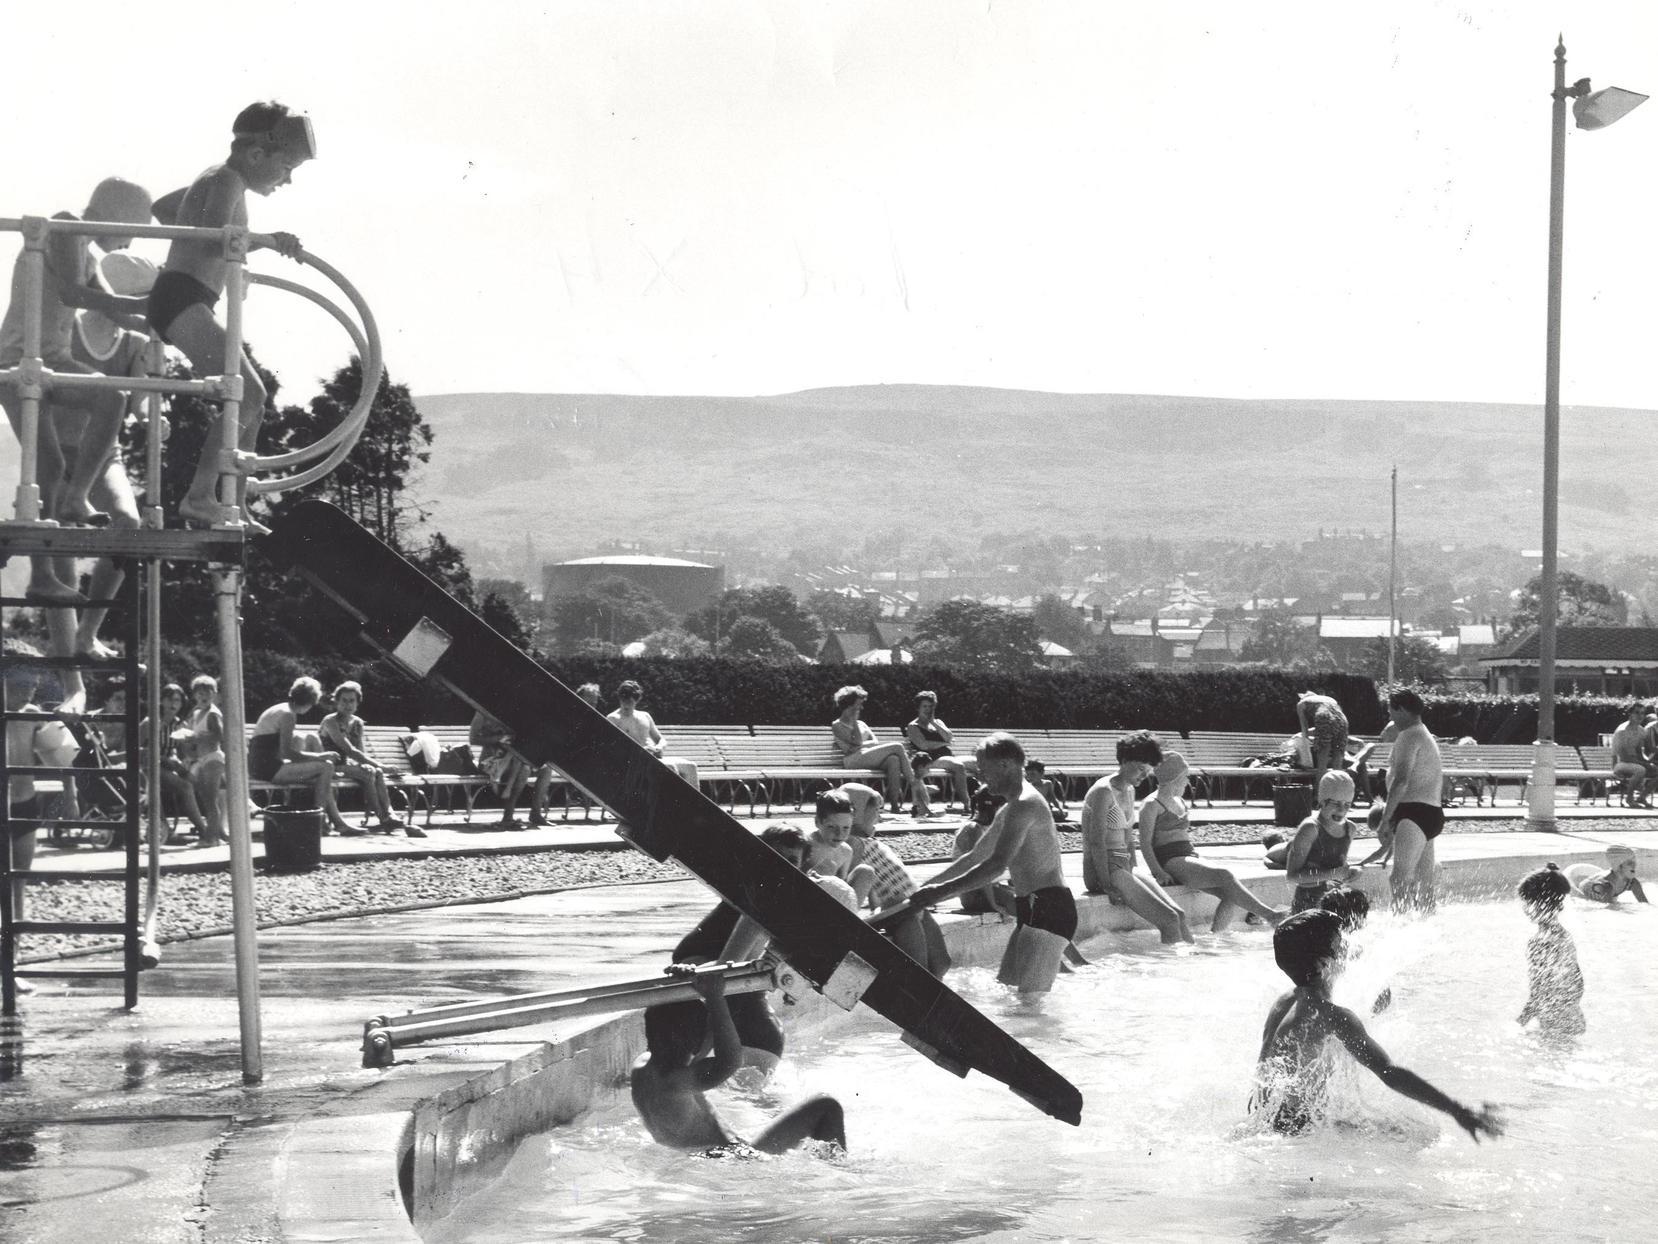 The swimming pool at Ilkley was proving a popular attraction as people made the most of the sunshine during the heatwave.